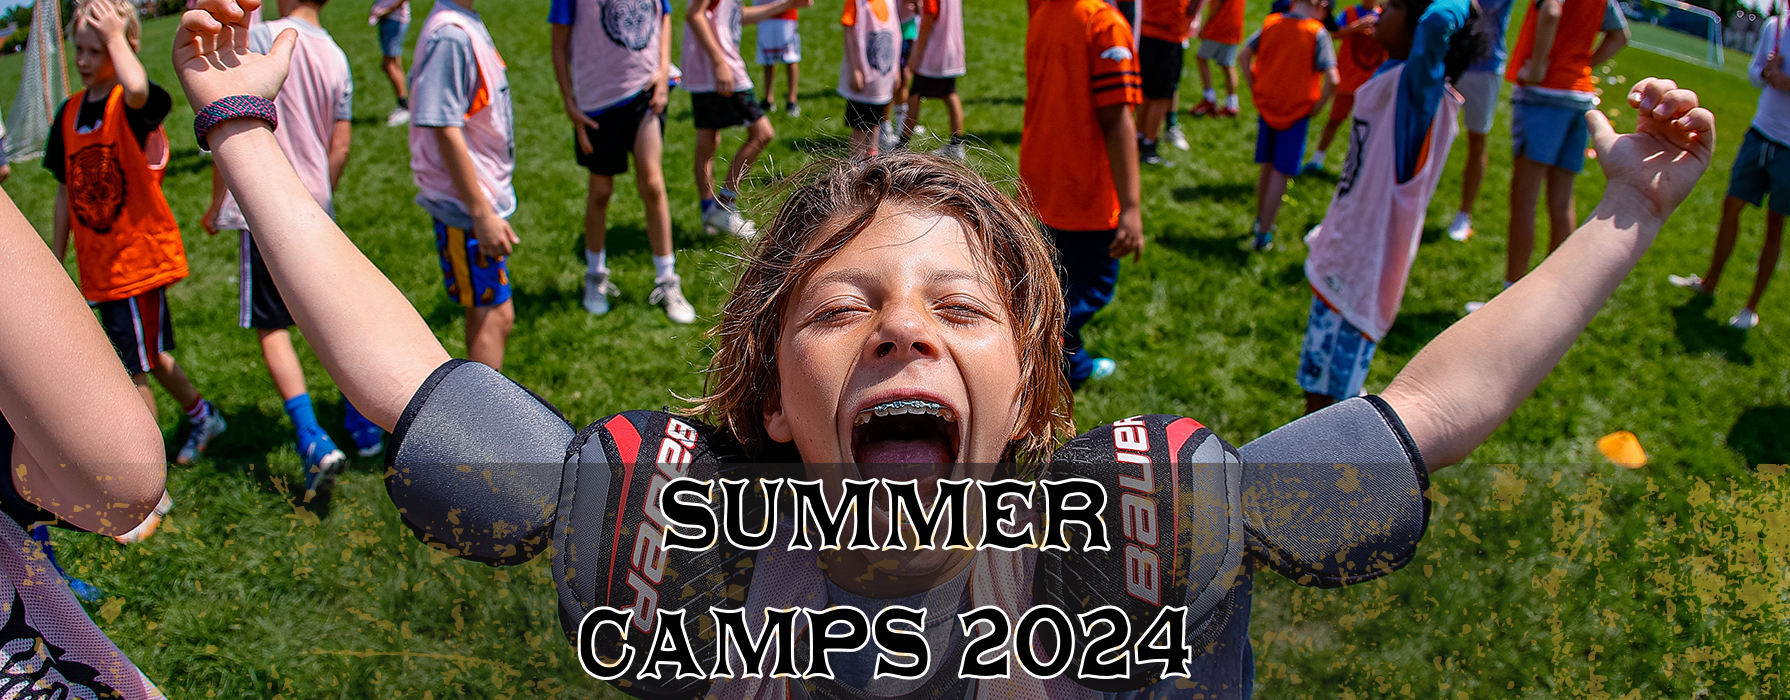 Camps 2024 Promo 6.png